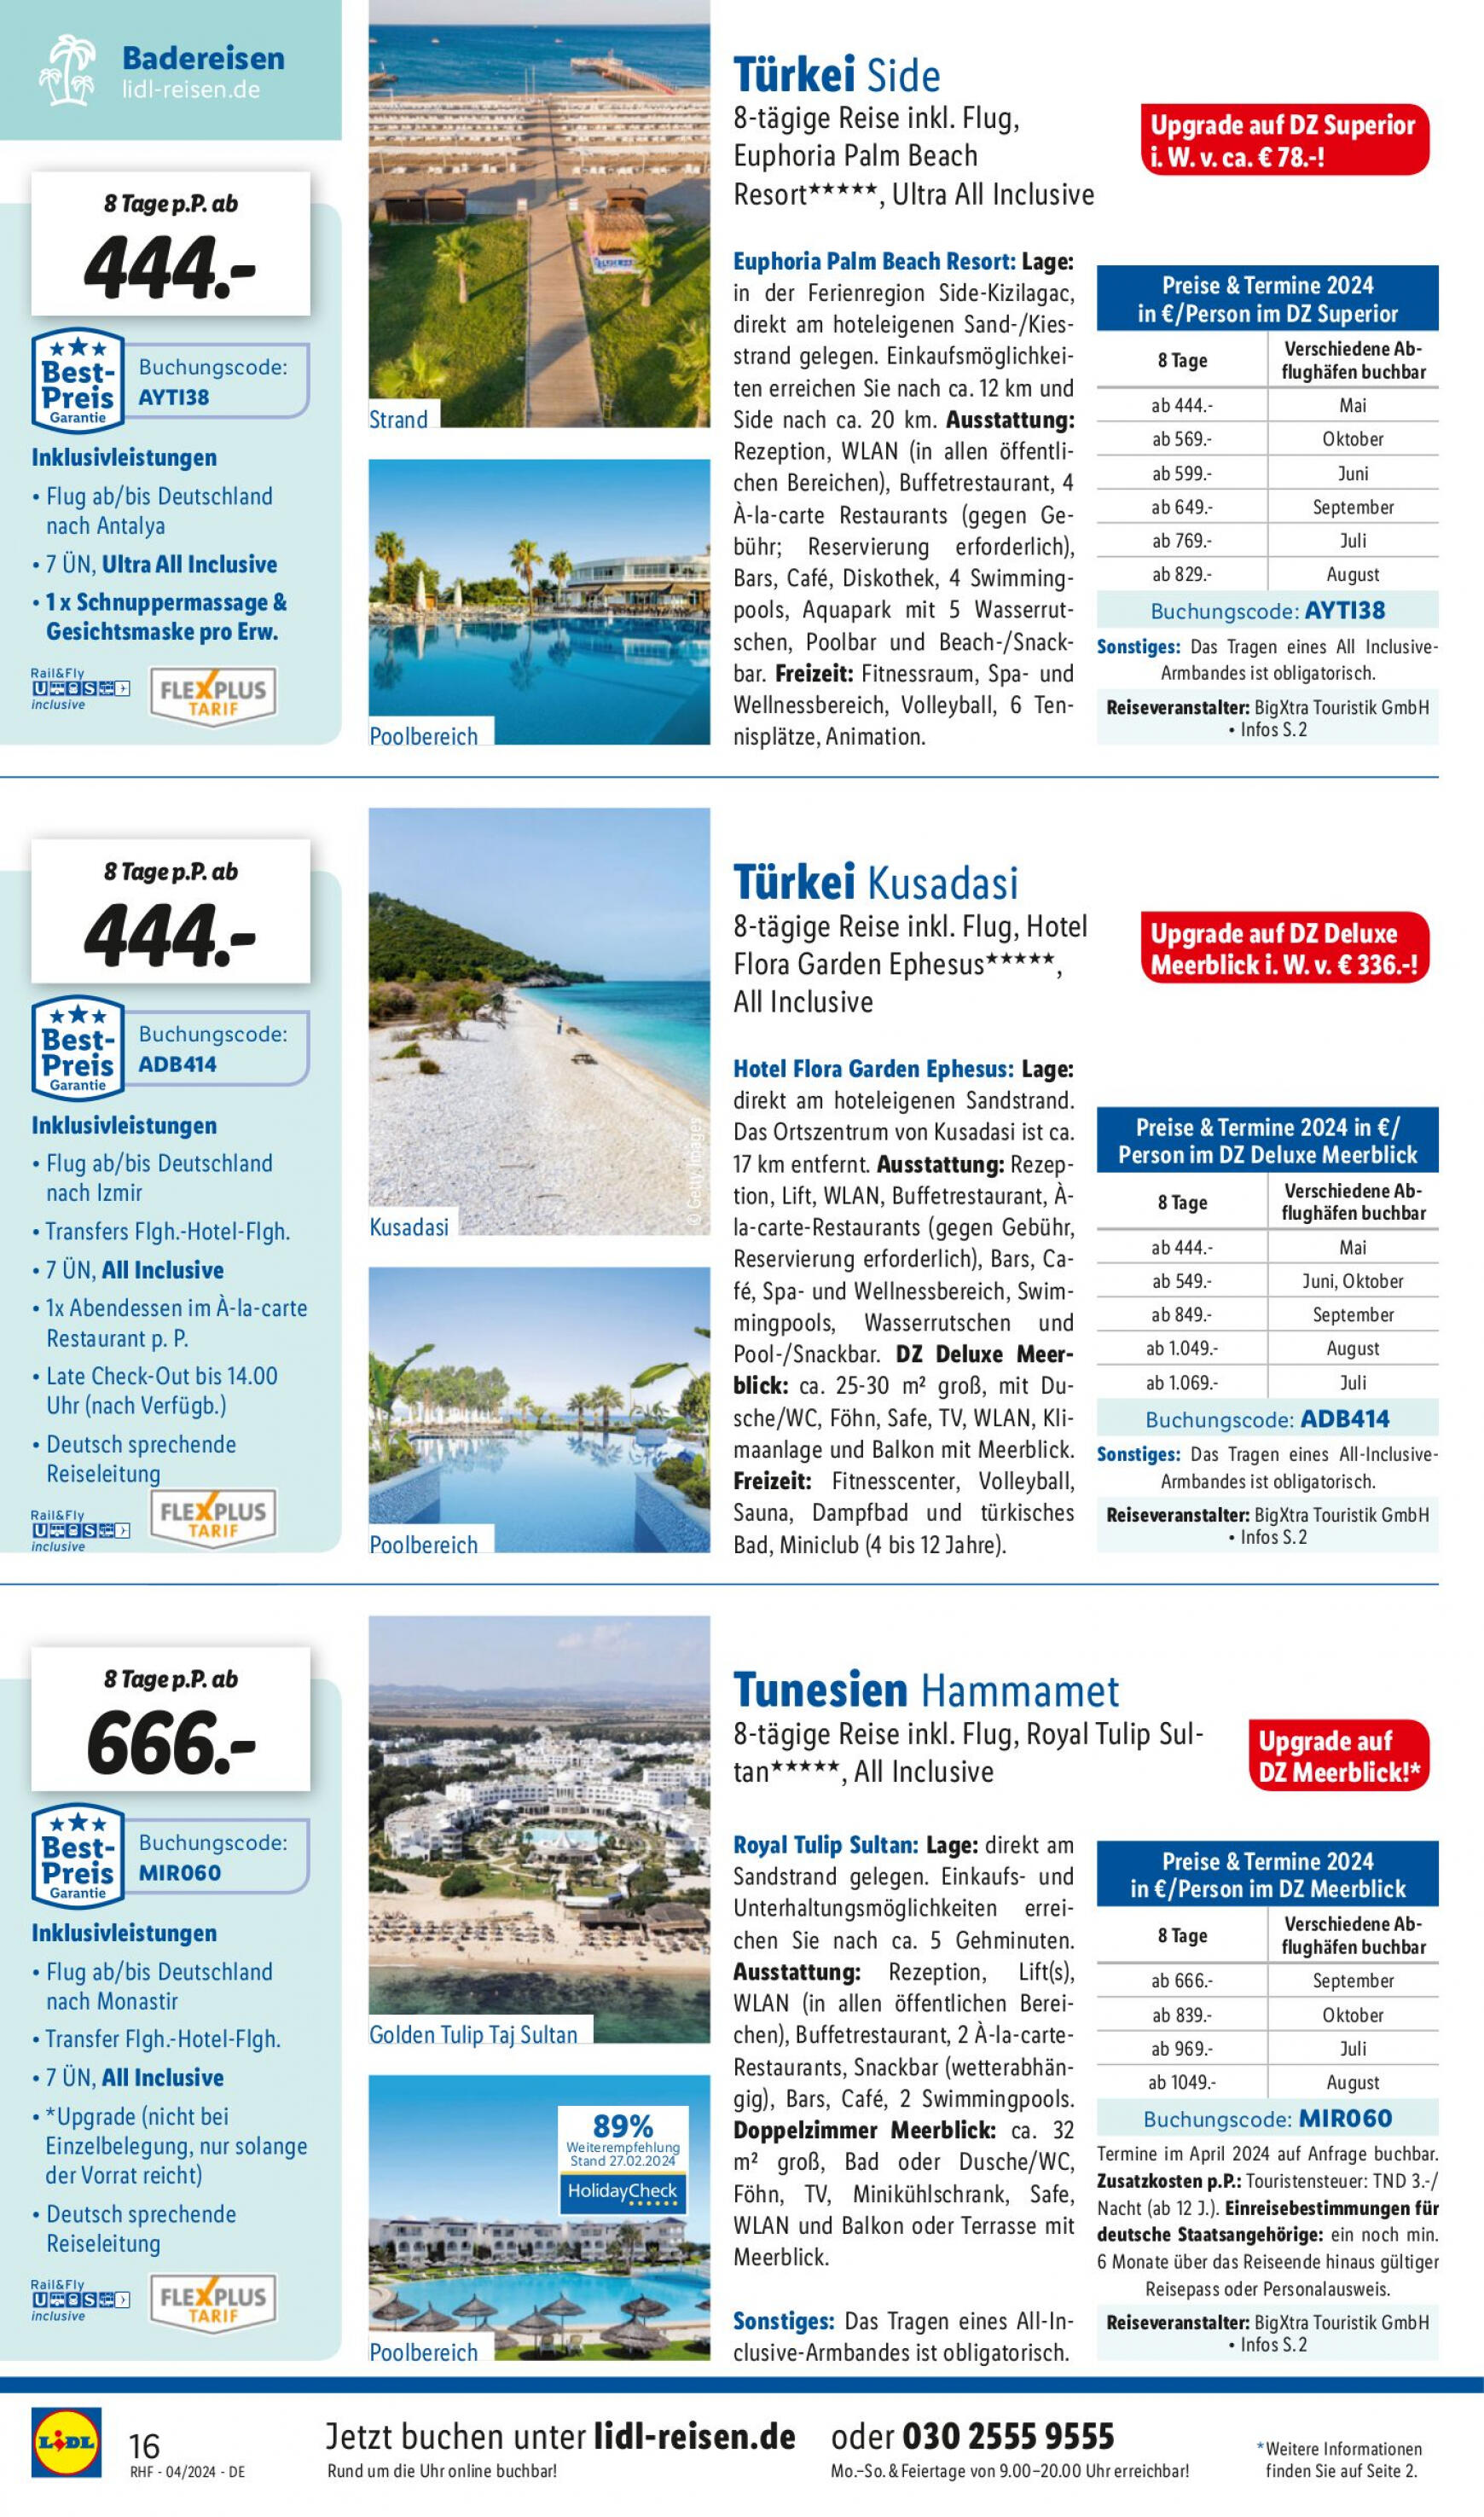 lidl - Flyer Lidl - April Reise-Highlights aktuell 27.03. - 30.04. - page: 16